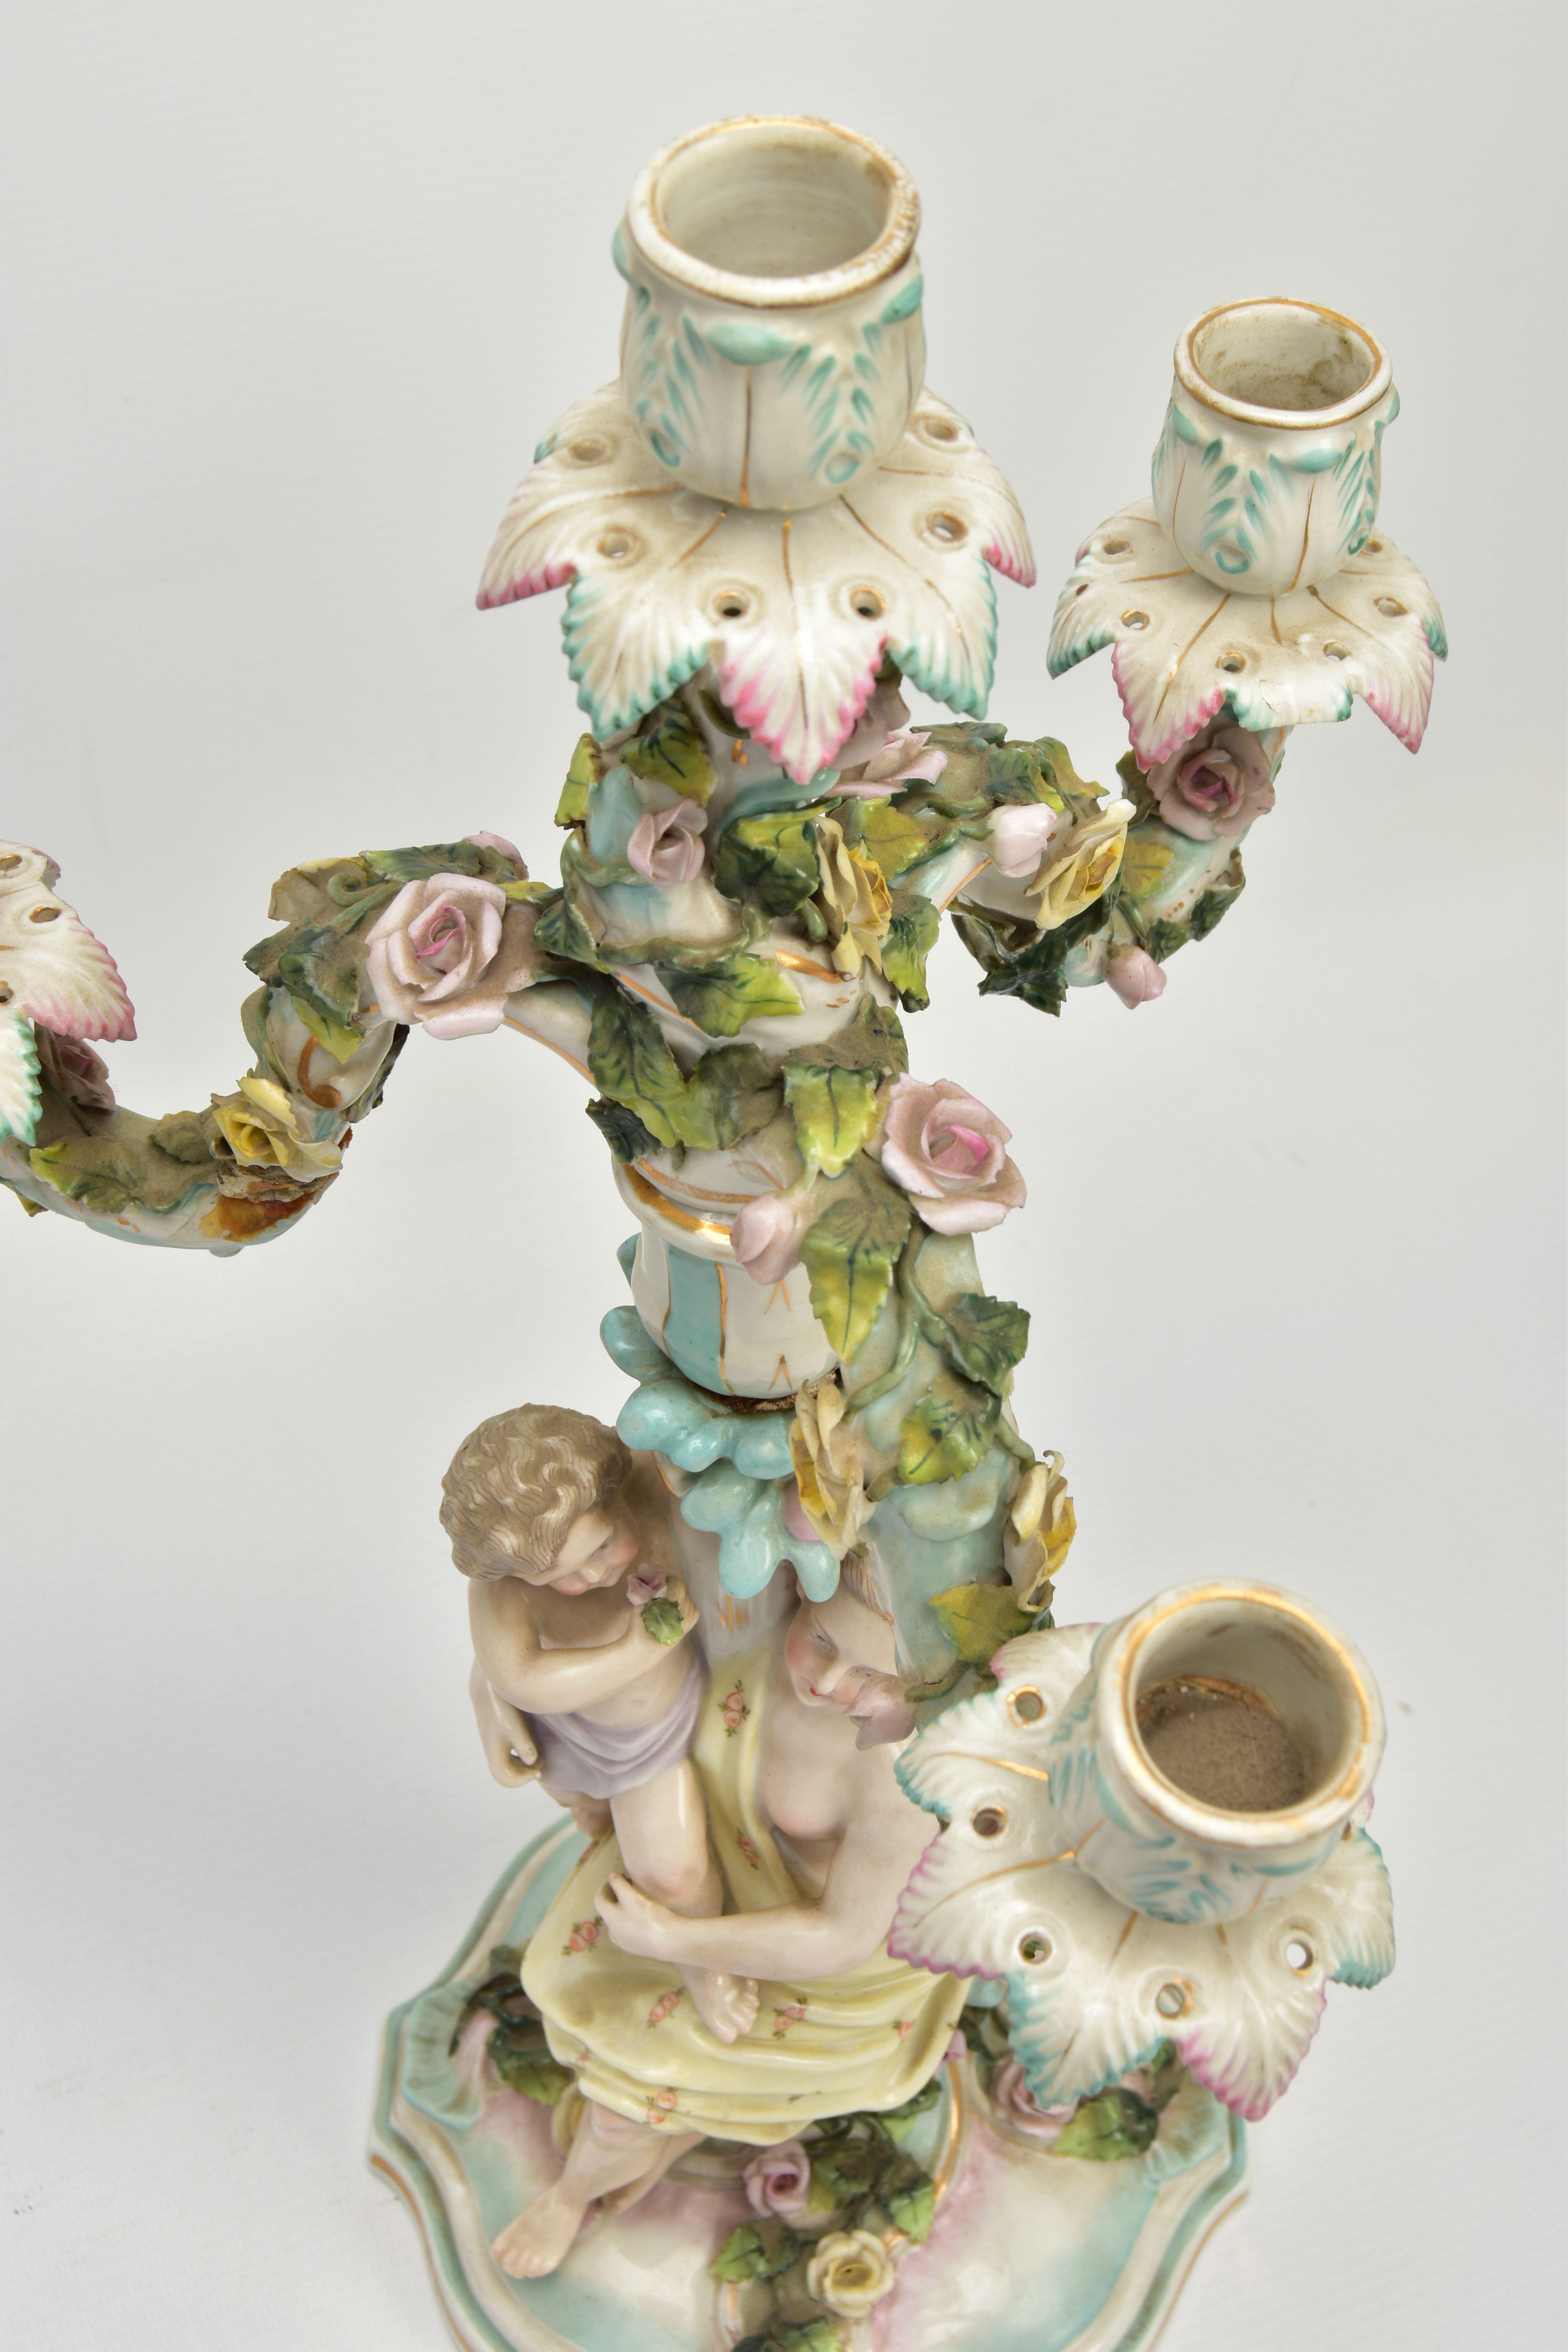 A PAIR OF LATE 19TH / EARLY 20TH CENTURY PLAUE PORCELAIN FLORALLY ENCRUSTED FIGURAL CANDELABRA, each - Image 23 of 23